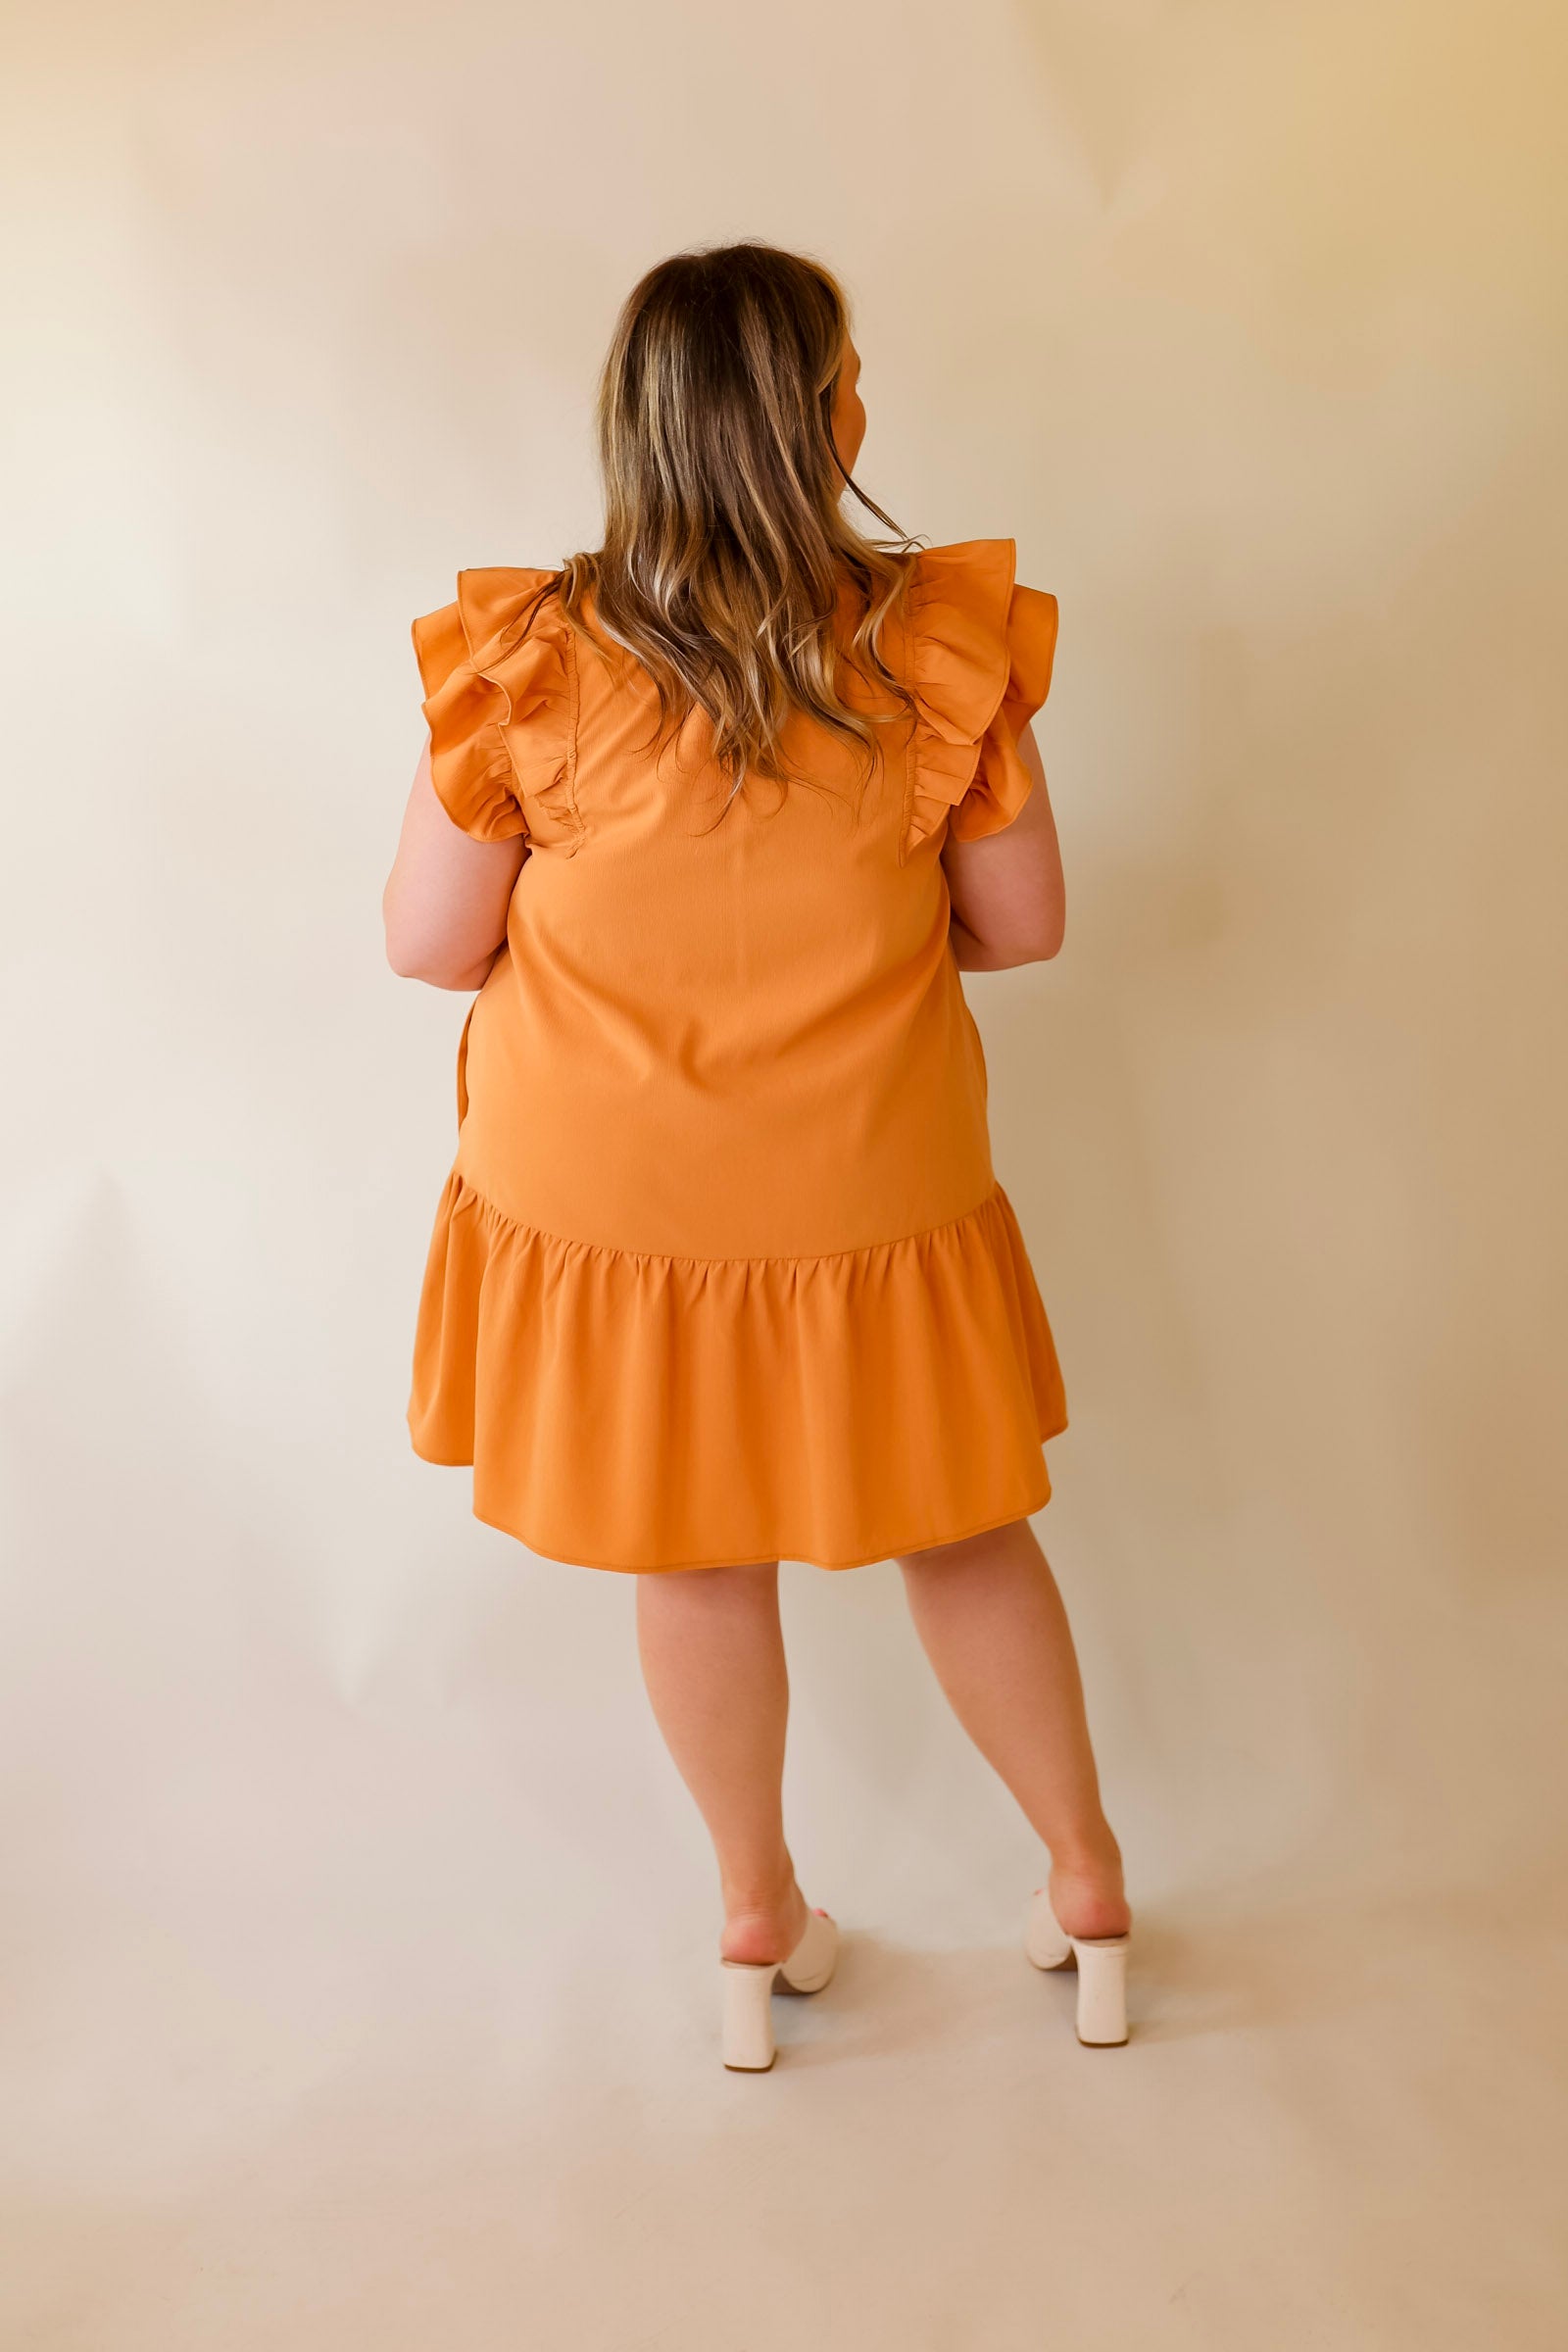 Powerful Love Ruffle Cap Sleeve Dress with Keyhole and Tie Neckline in Sunset Orange - Giddy Up Glamour Boutique